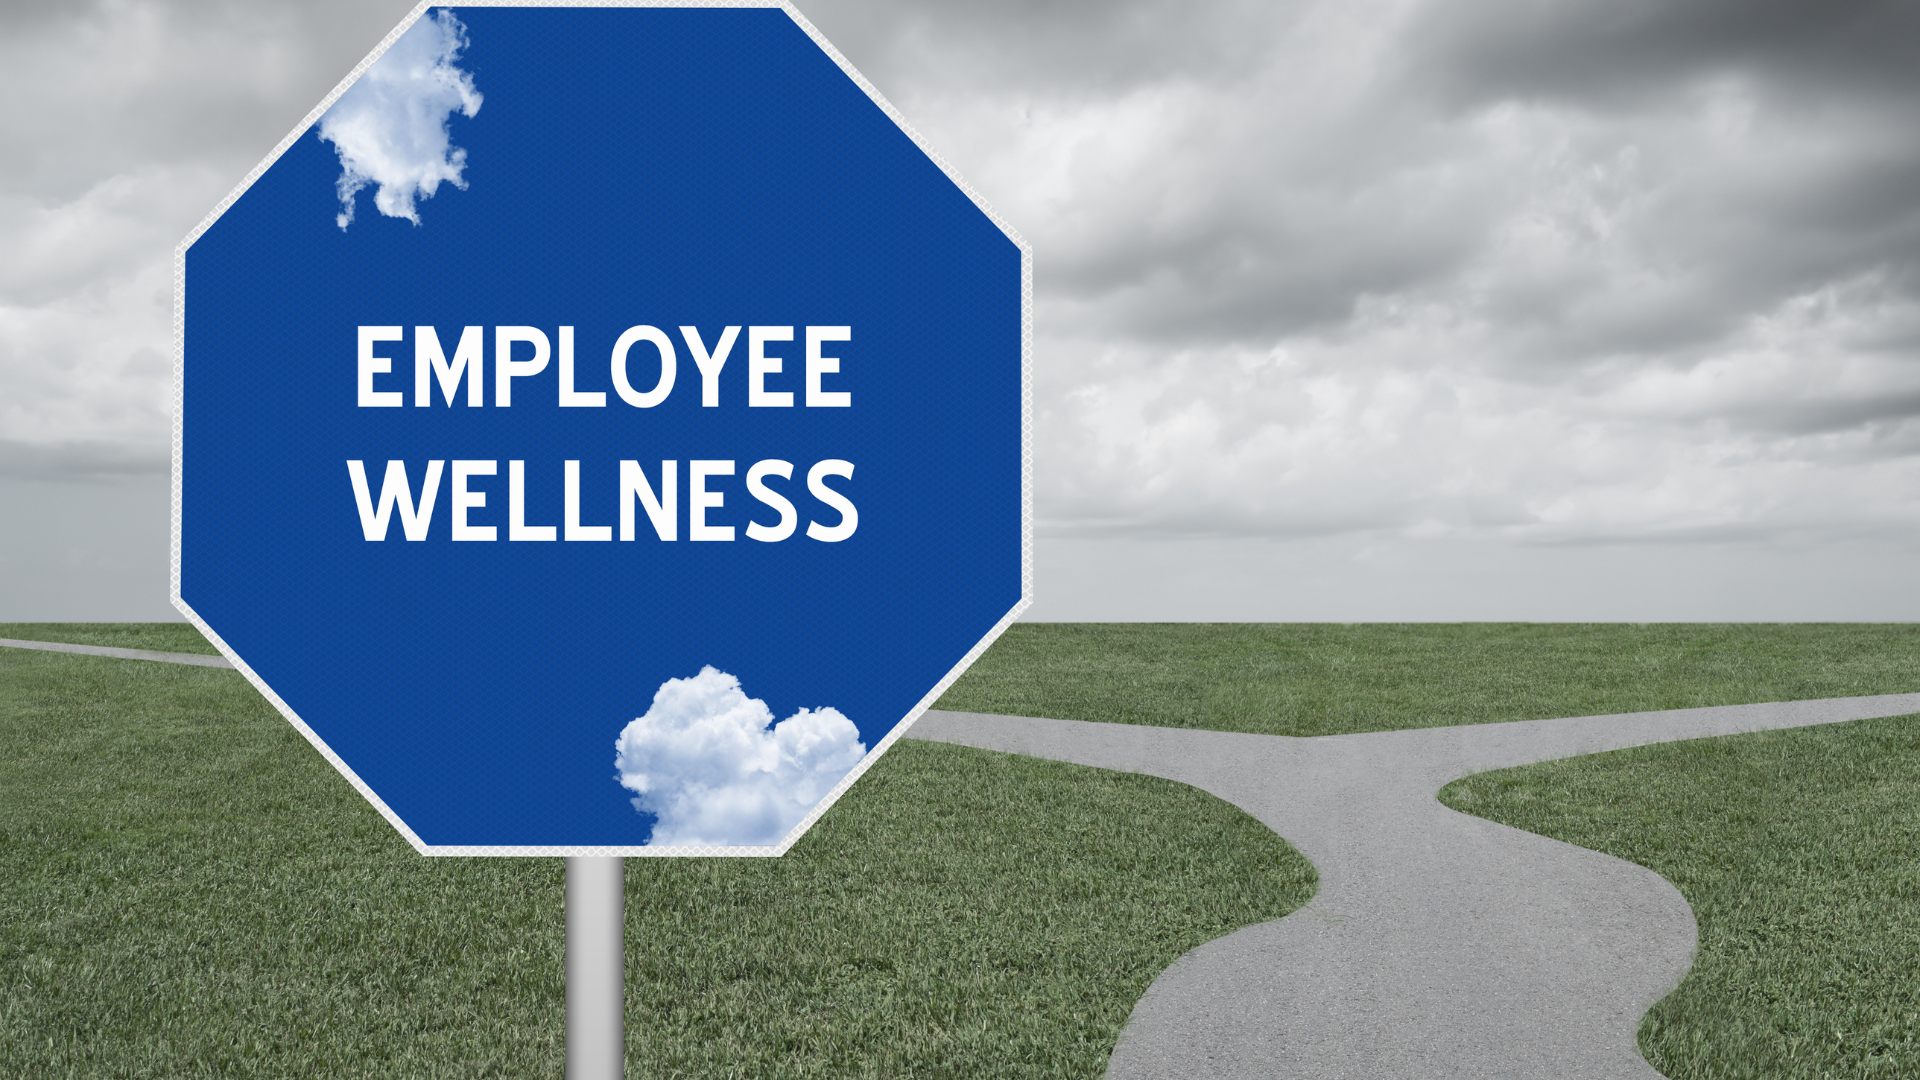 Putting People First: SAU1 Speaks Up About Wellness at Work